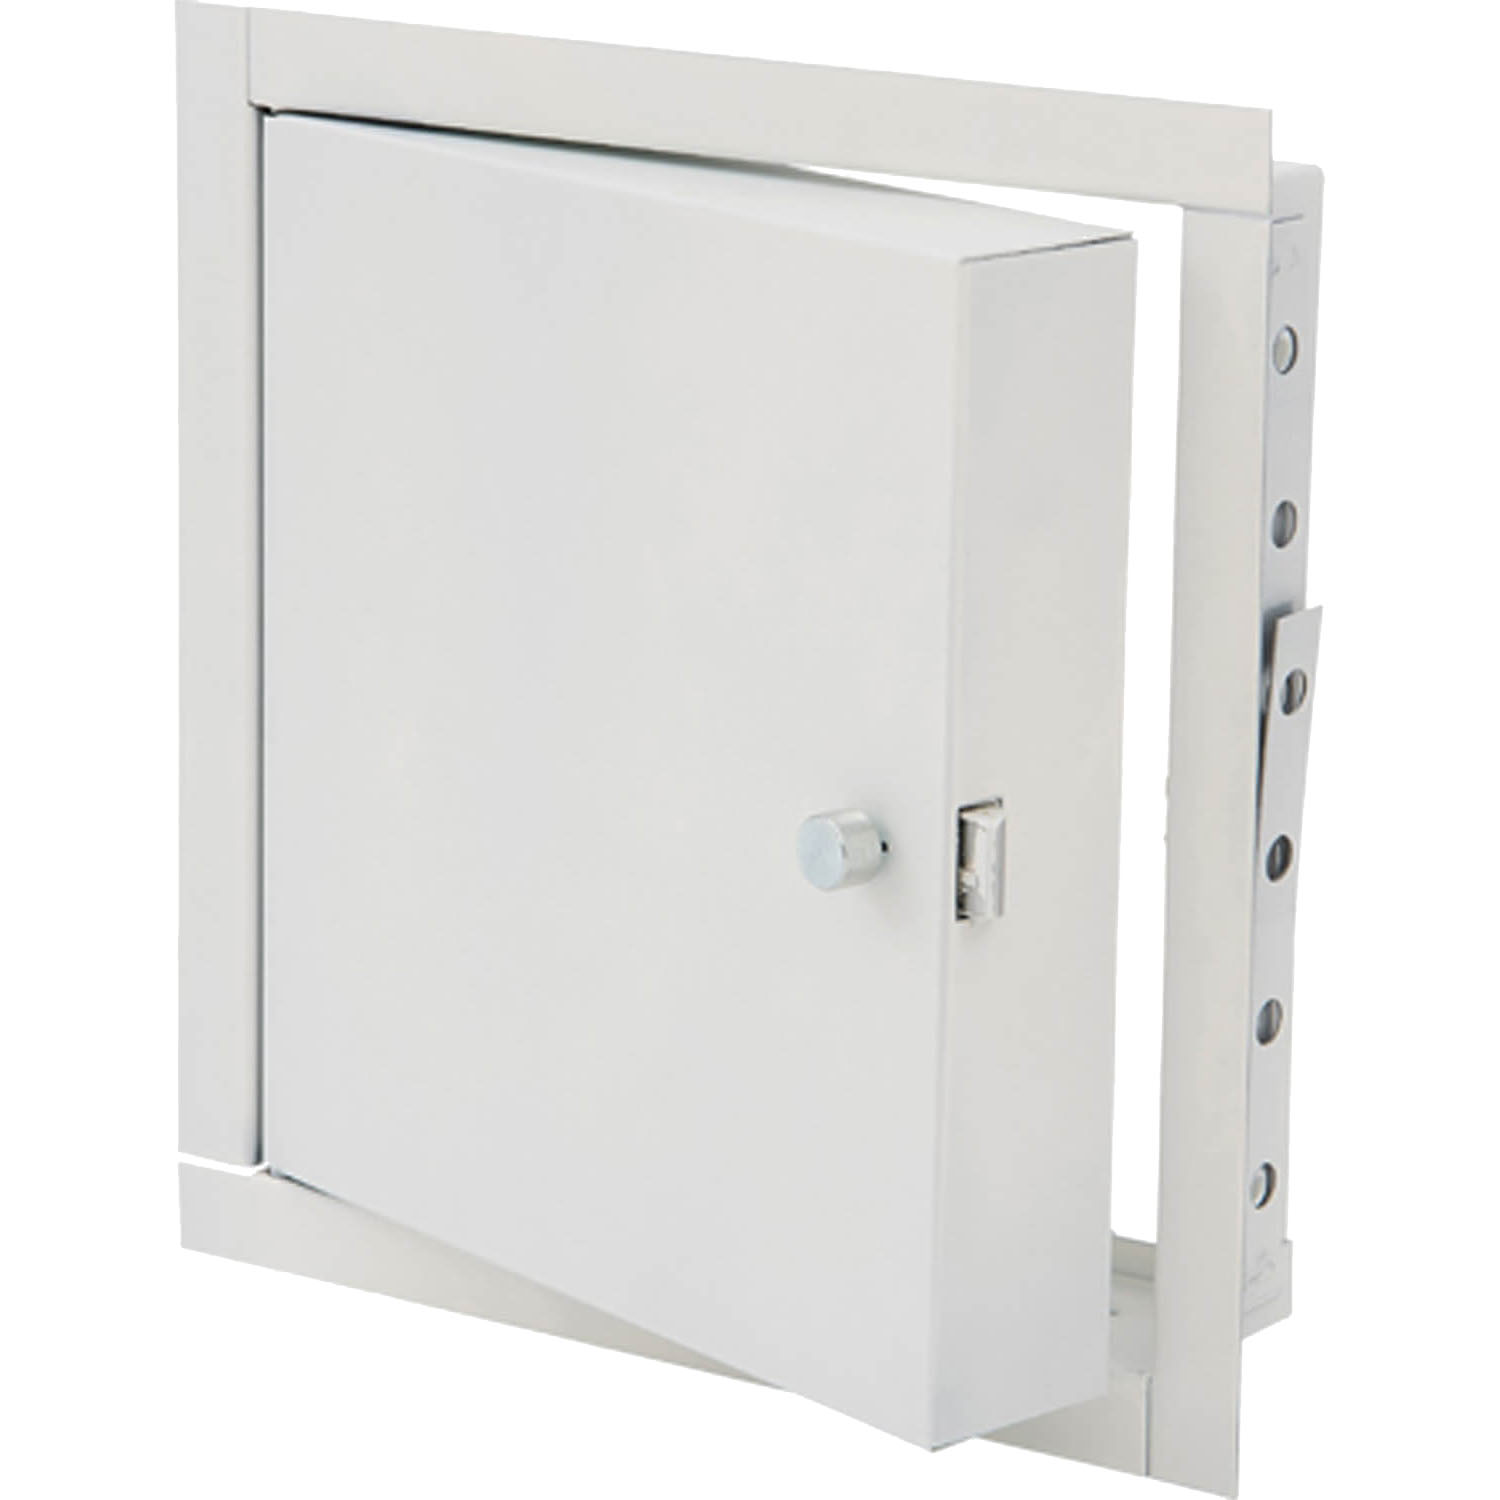 Access Door - E-FRC  8" x 8" Insulated Fire Rated for Ceilings and Walls